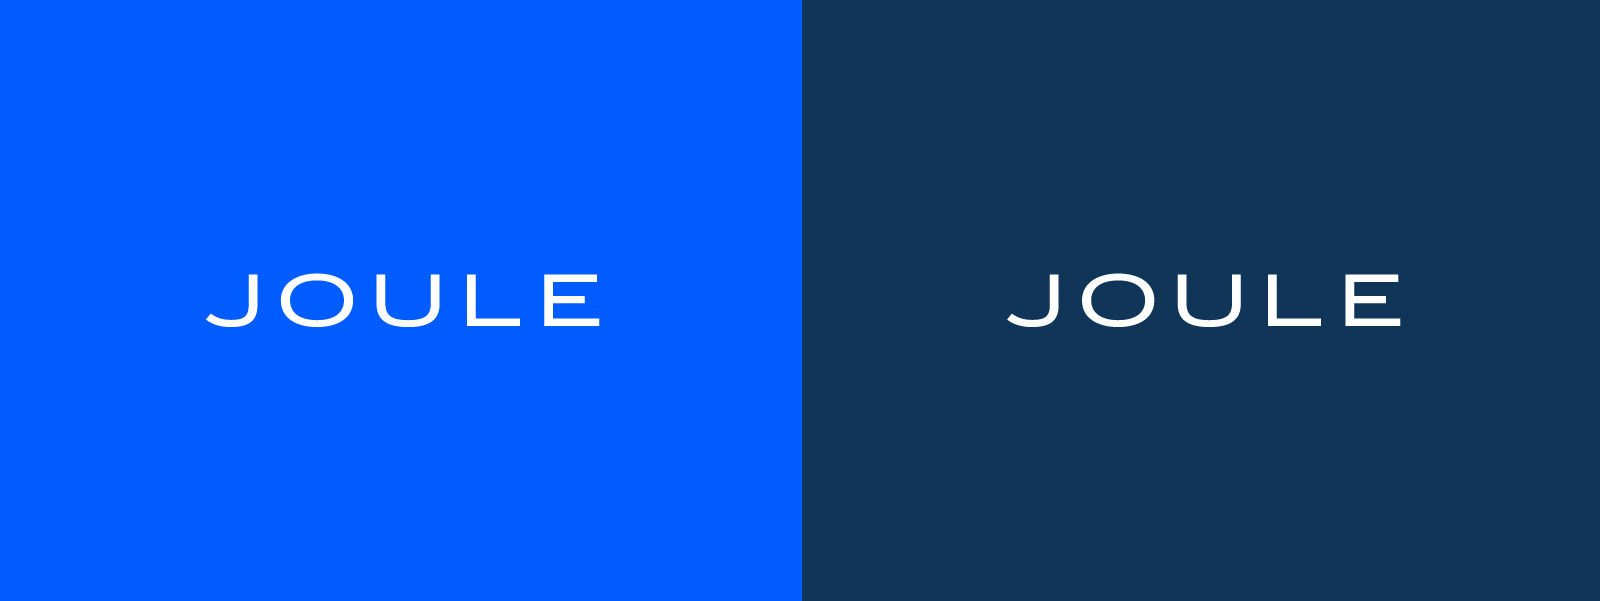 An Identity for Joule Financial By Bullhorn Creative